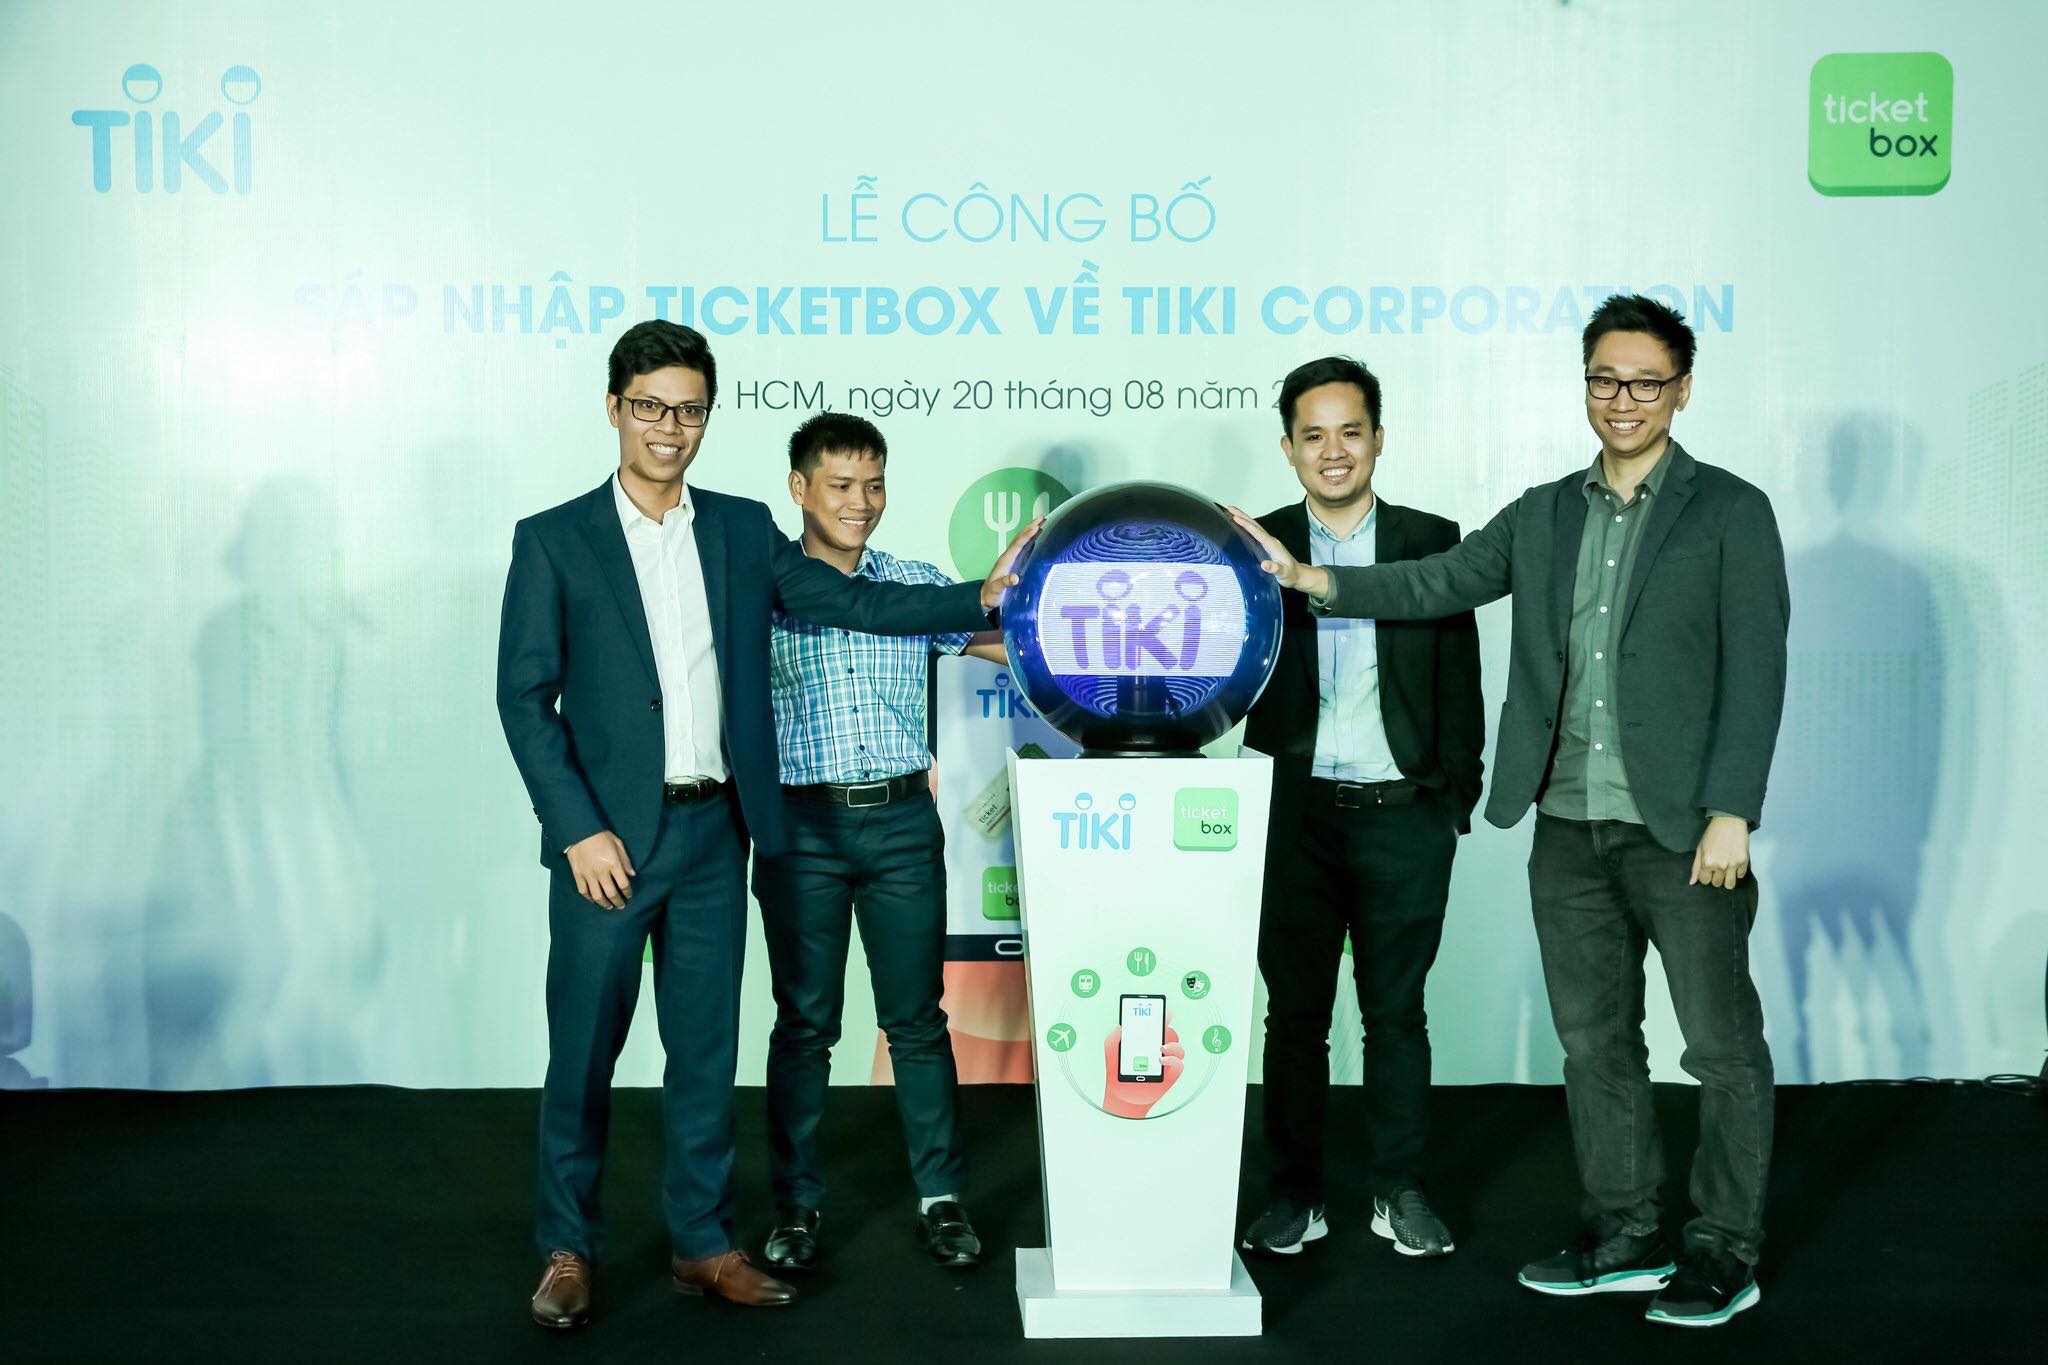 Vietnam’s leading e-commerce site Tiki purchases online ticketing startup Ticketbox